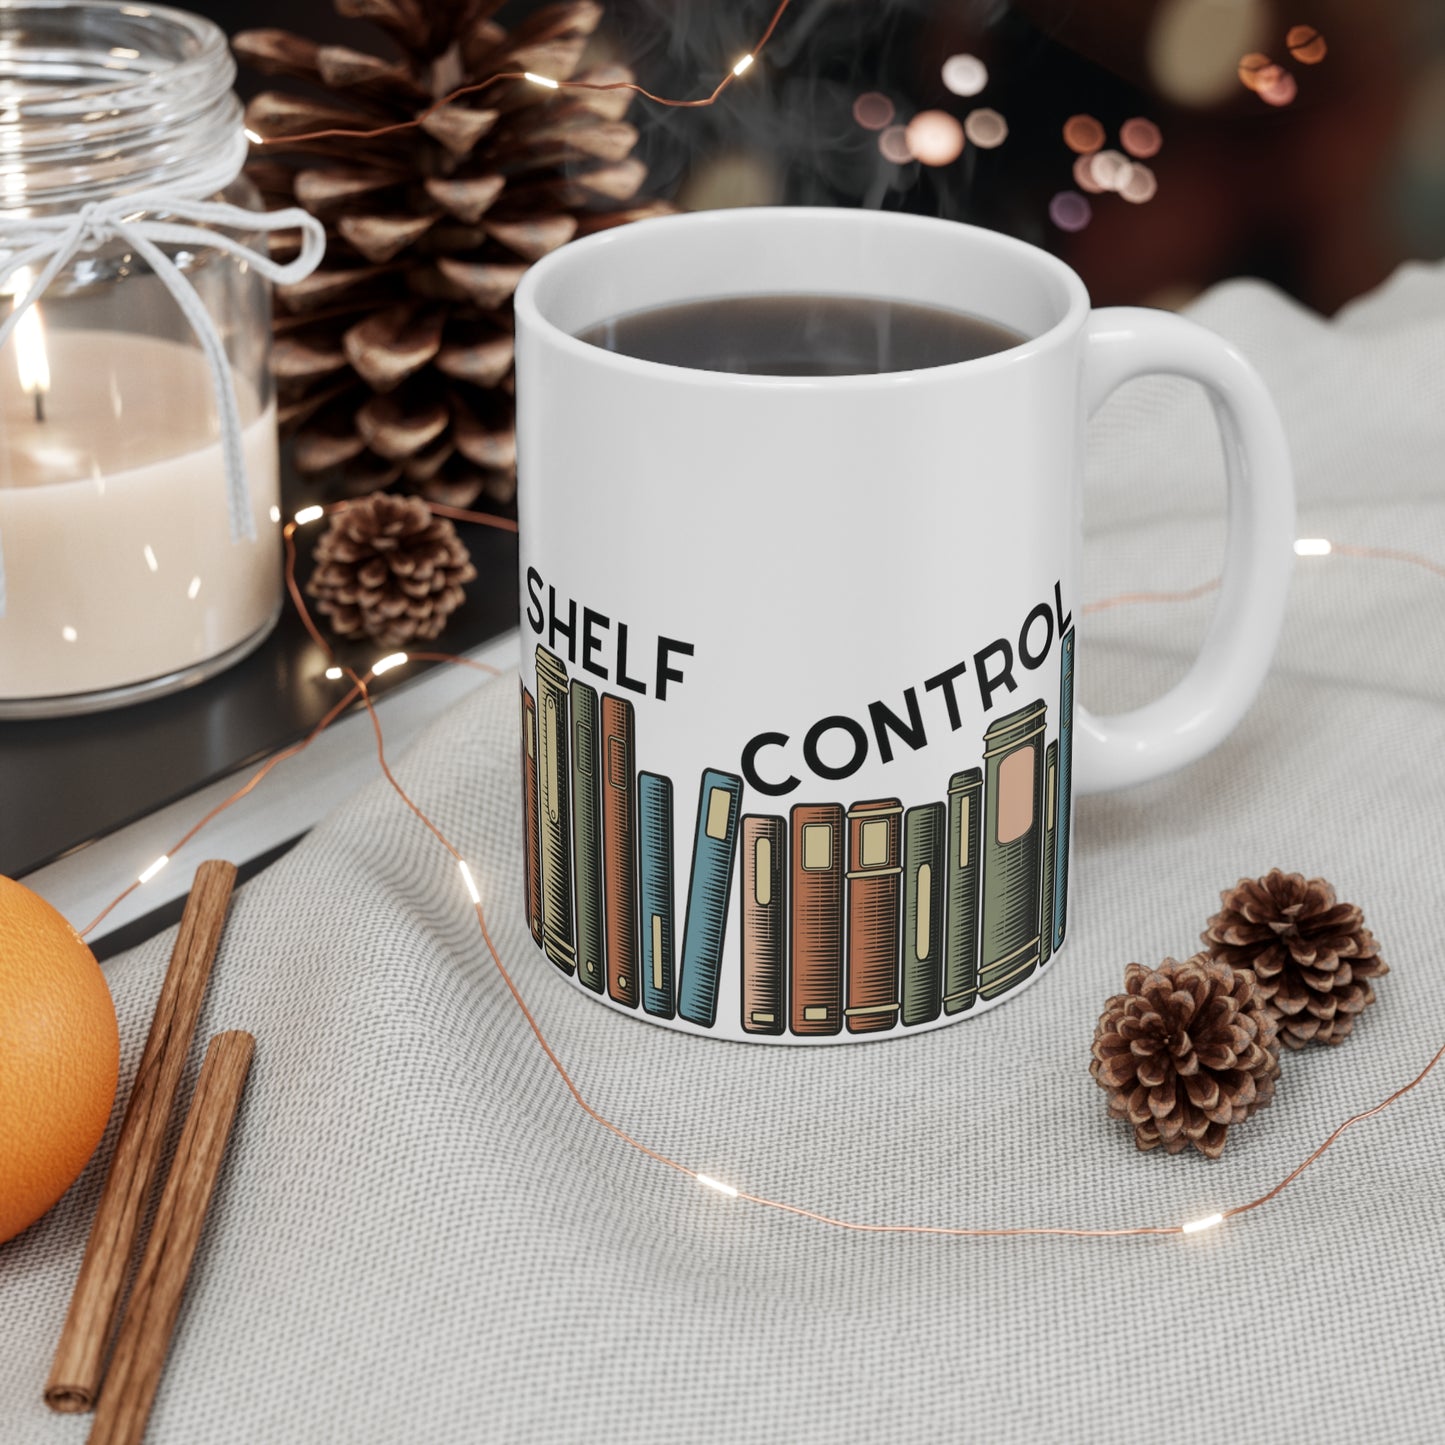 Give Up Your Shelf Control. This Mug Shows Your True Nature